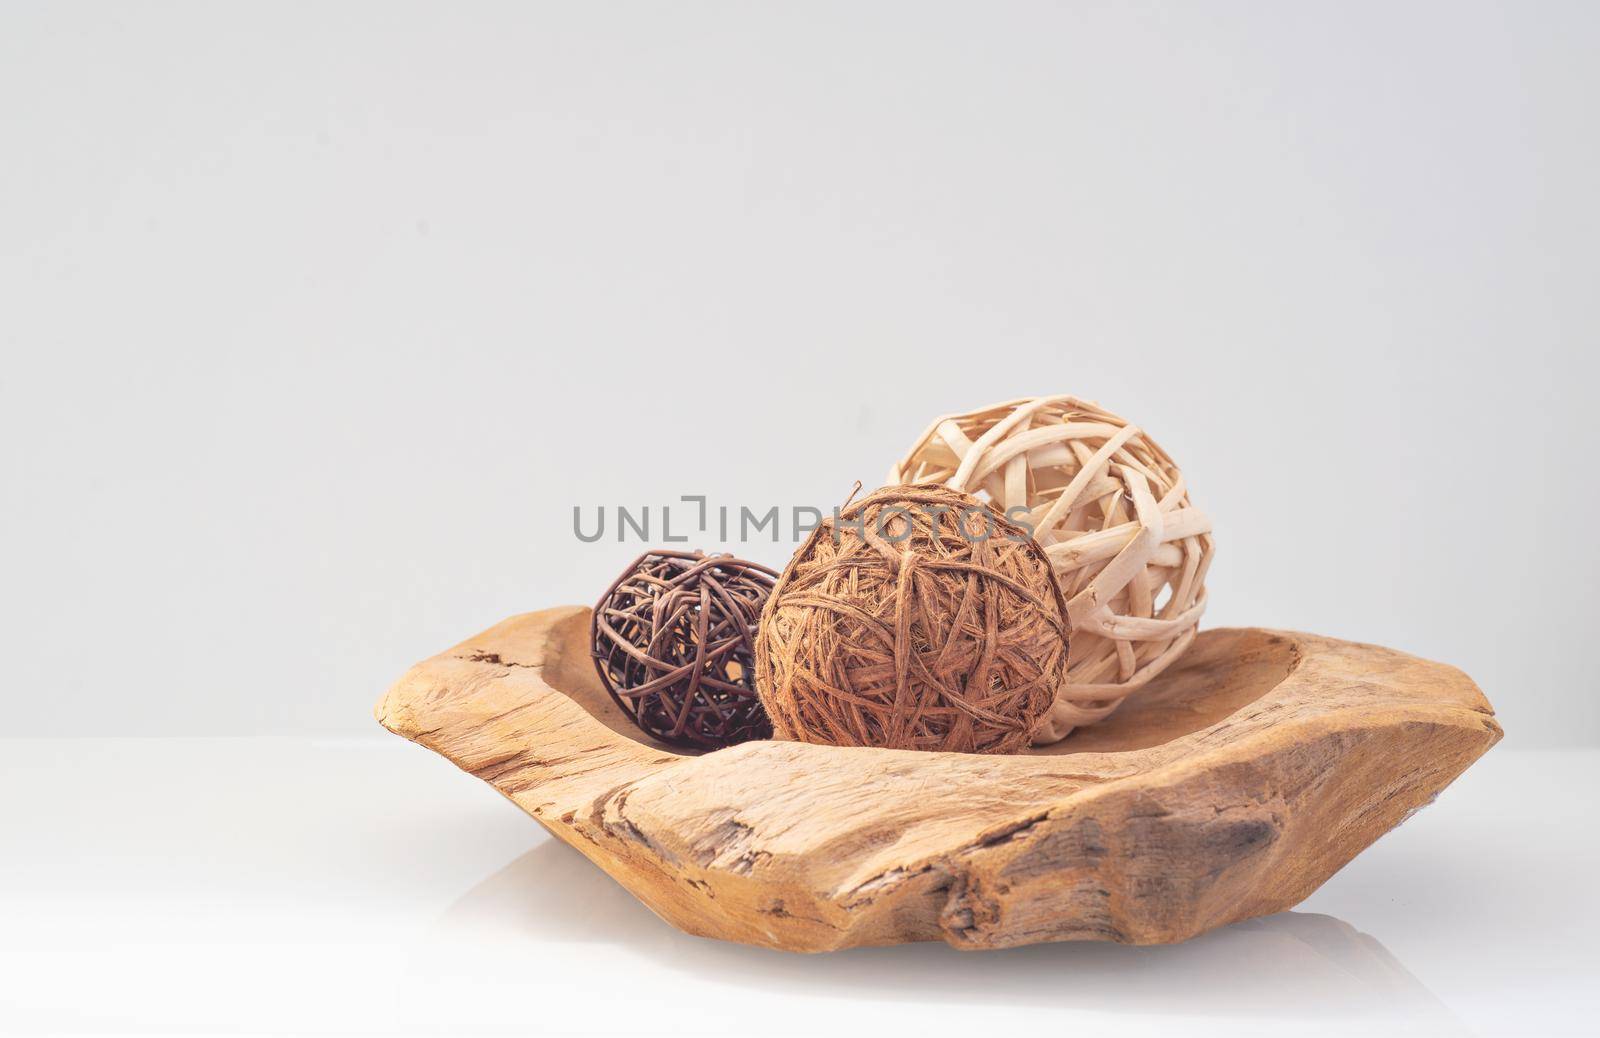 wicker balls from a vine of different natural colors on a wooden tray on a light background